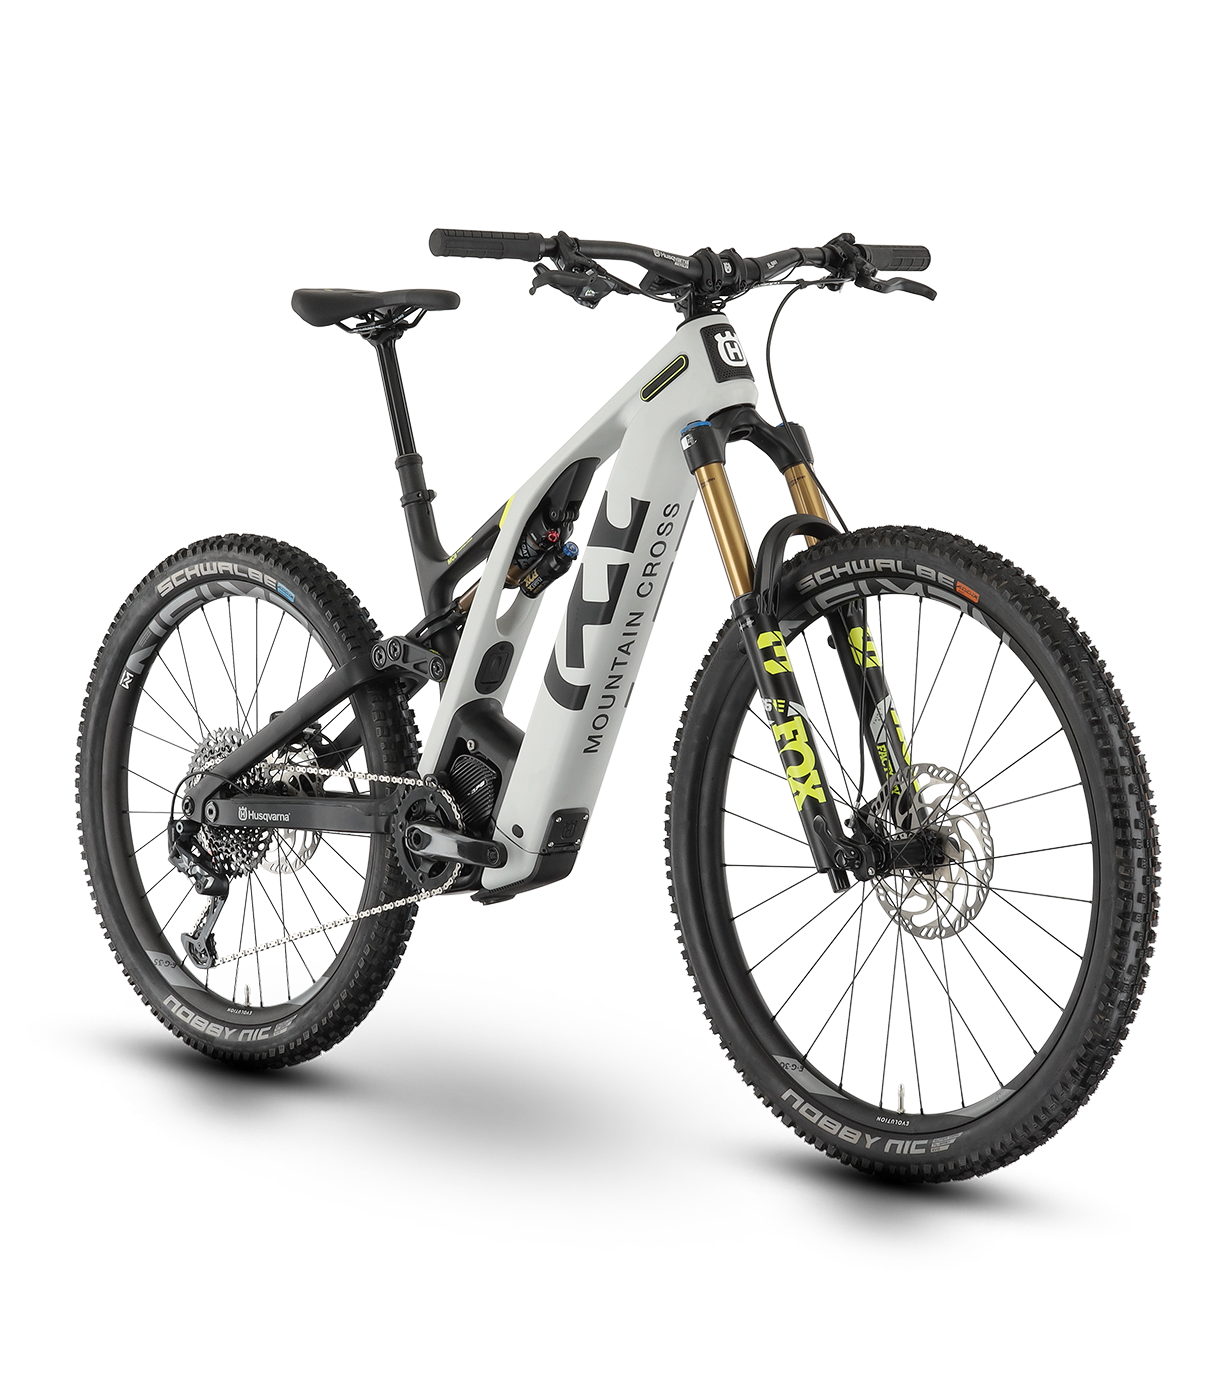 2023 Husqvarna Mountain Cross - MC6 for sale in the Pompano Beach, FL area. Get the best drive out price on 2023 Husqvarna Mountain Cross - MC6 and compare.